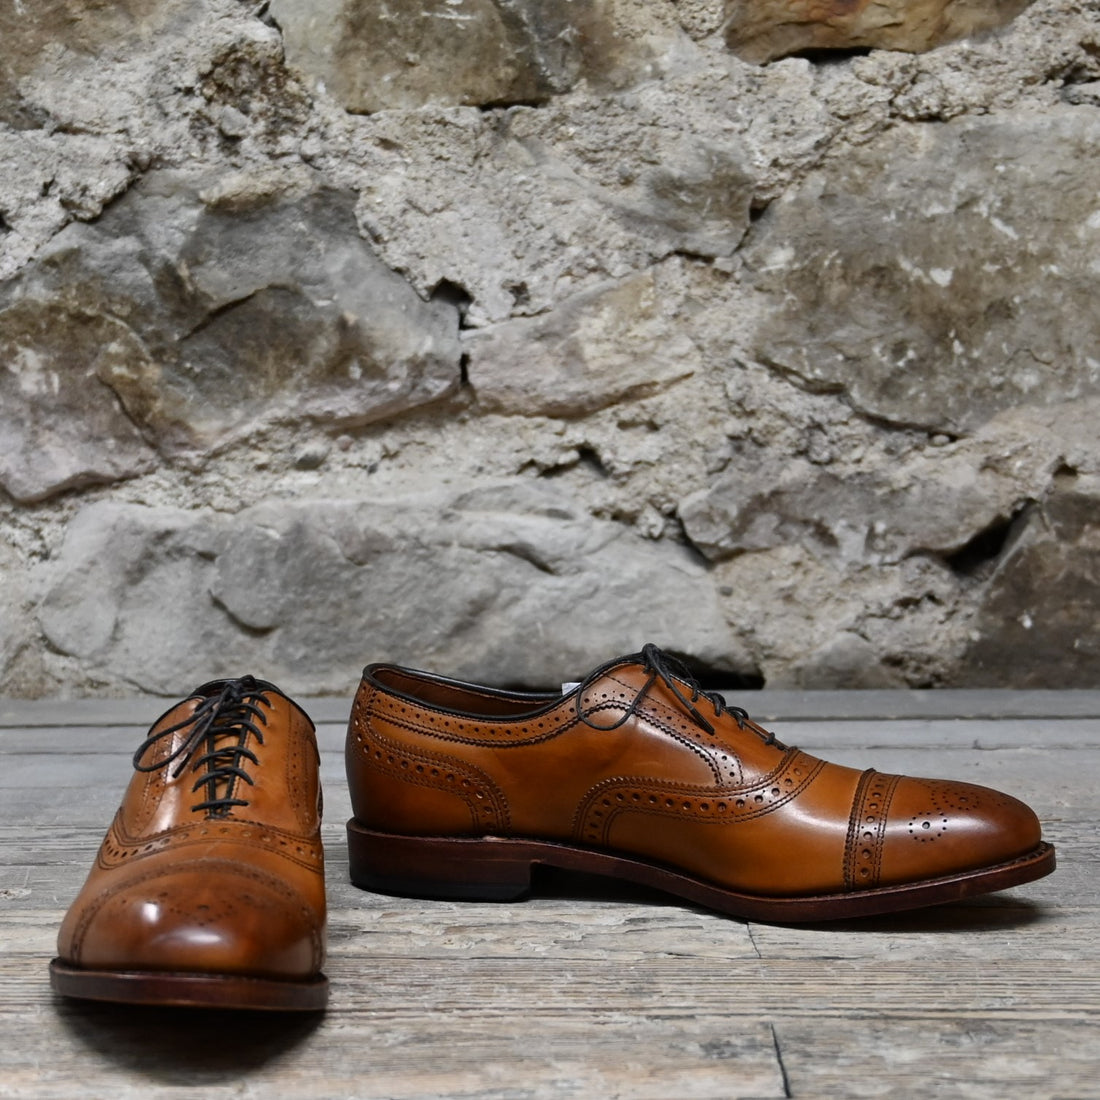 Strandmok Cap-toe Oxford view of front and side